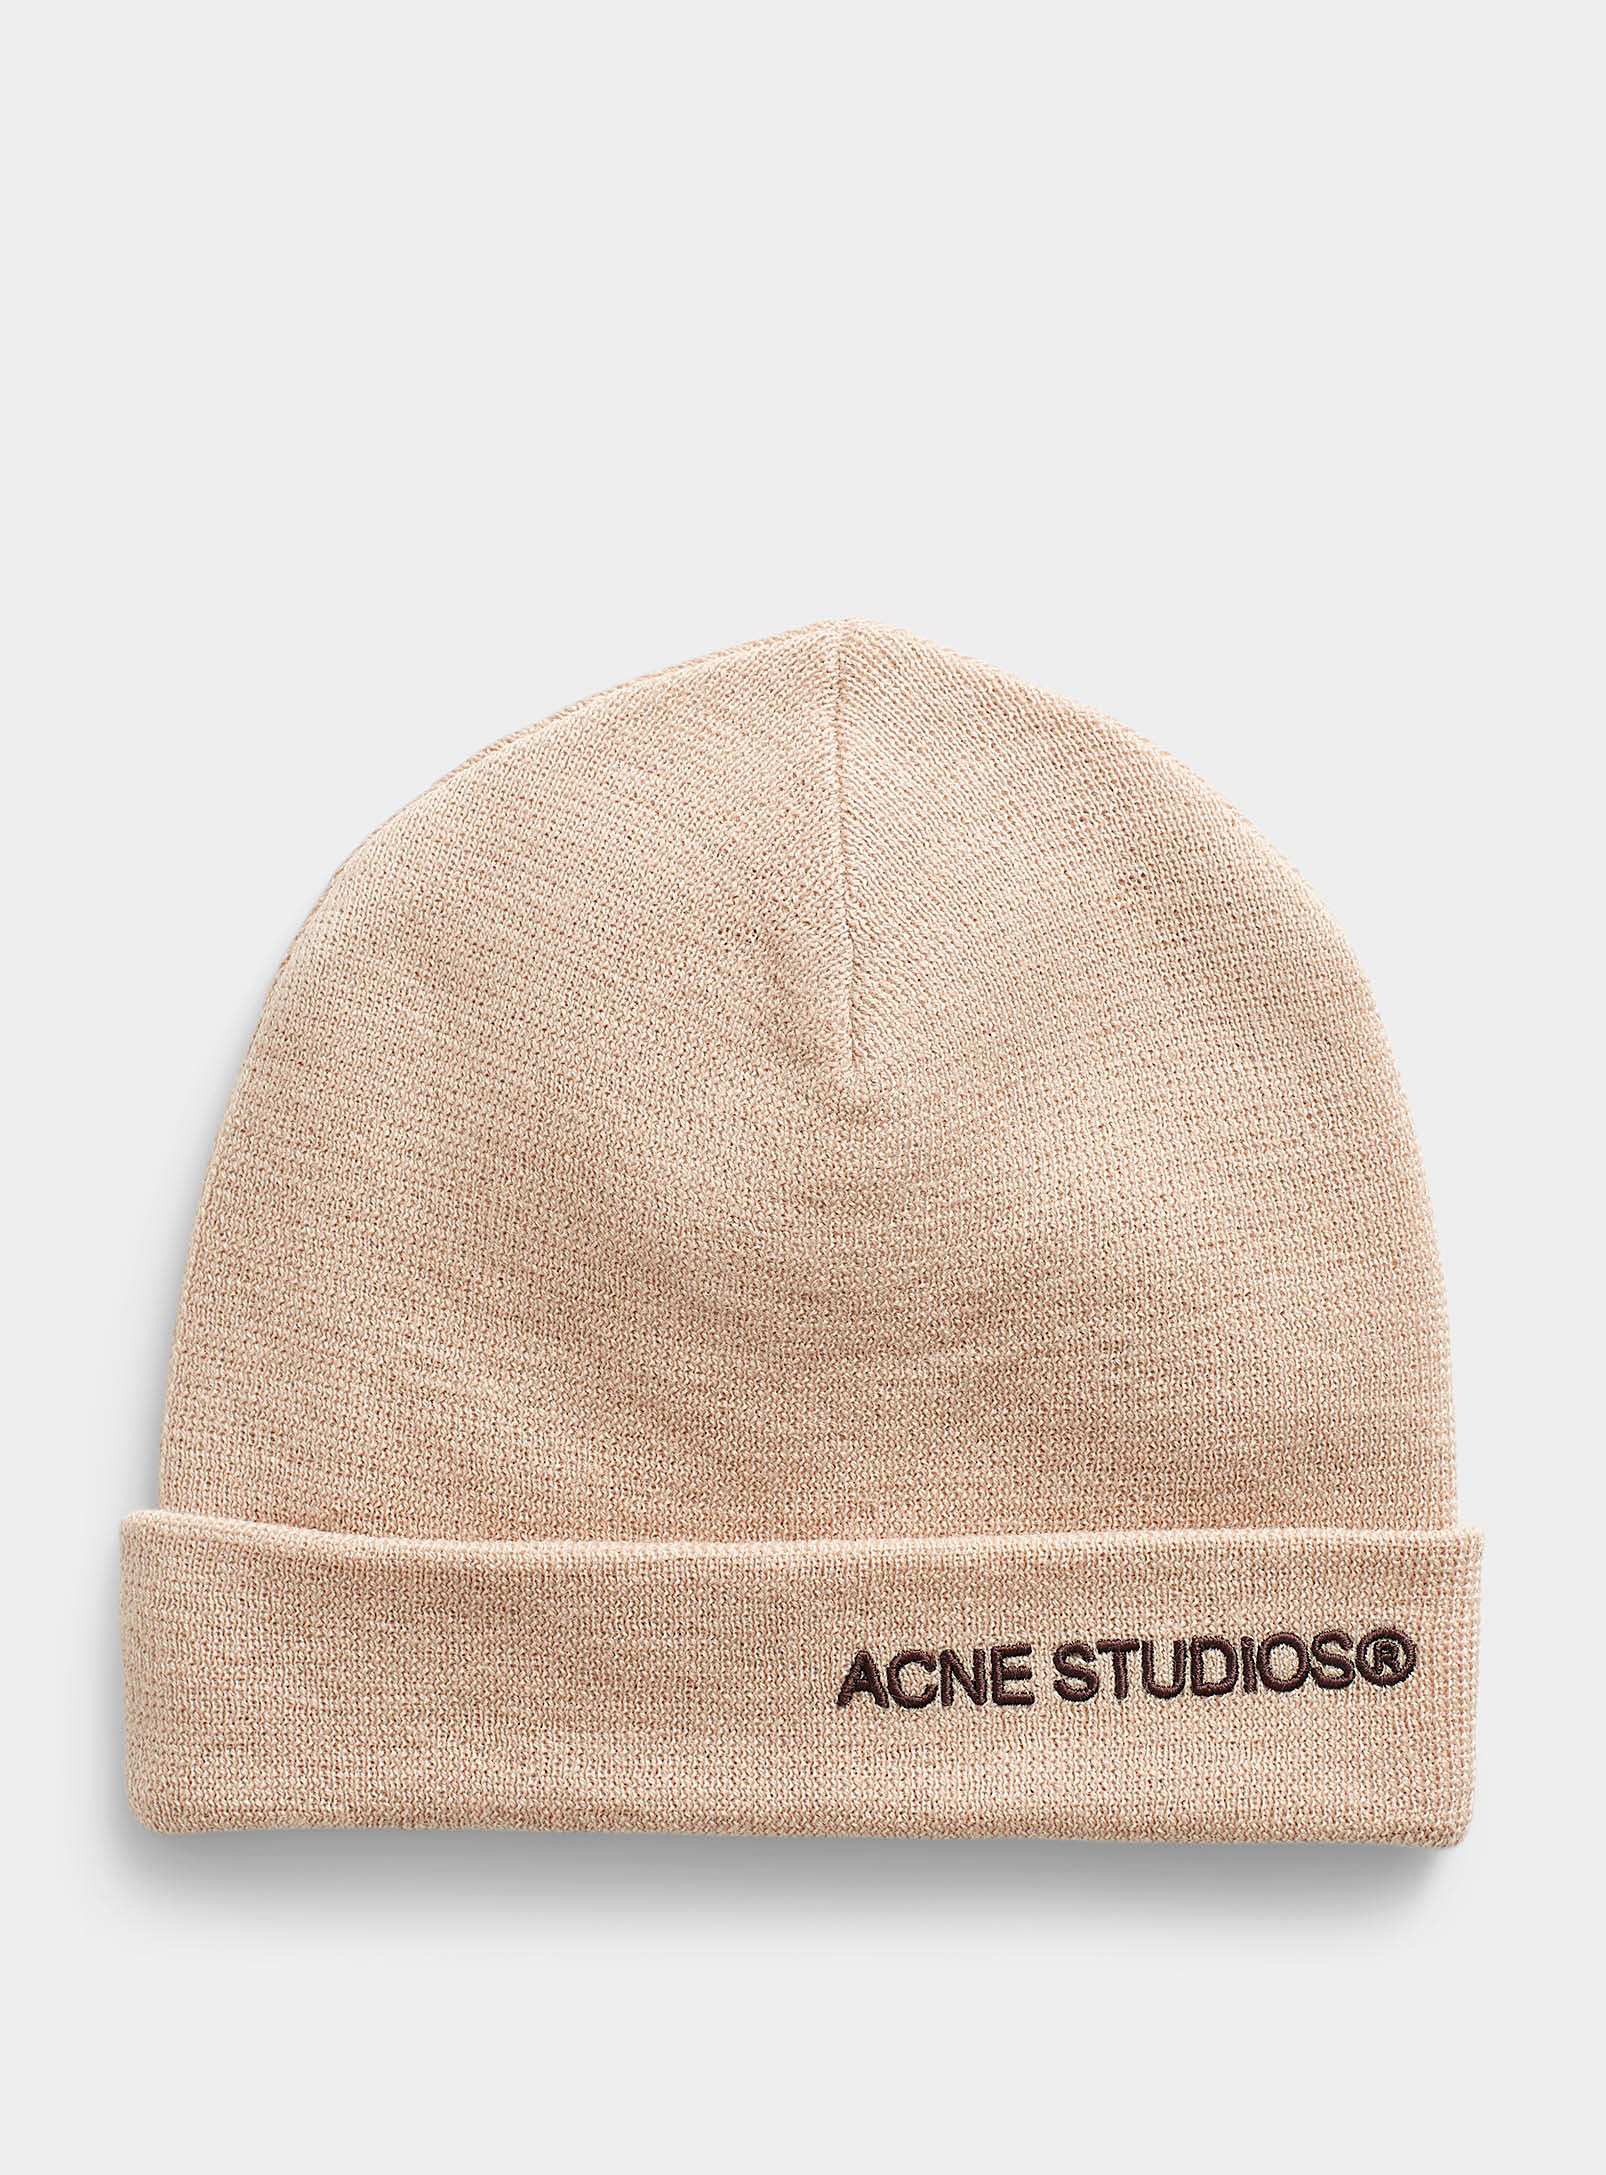 Acne Studios - Men's Embroidered logo wool Tuque Hat